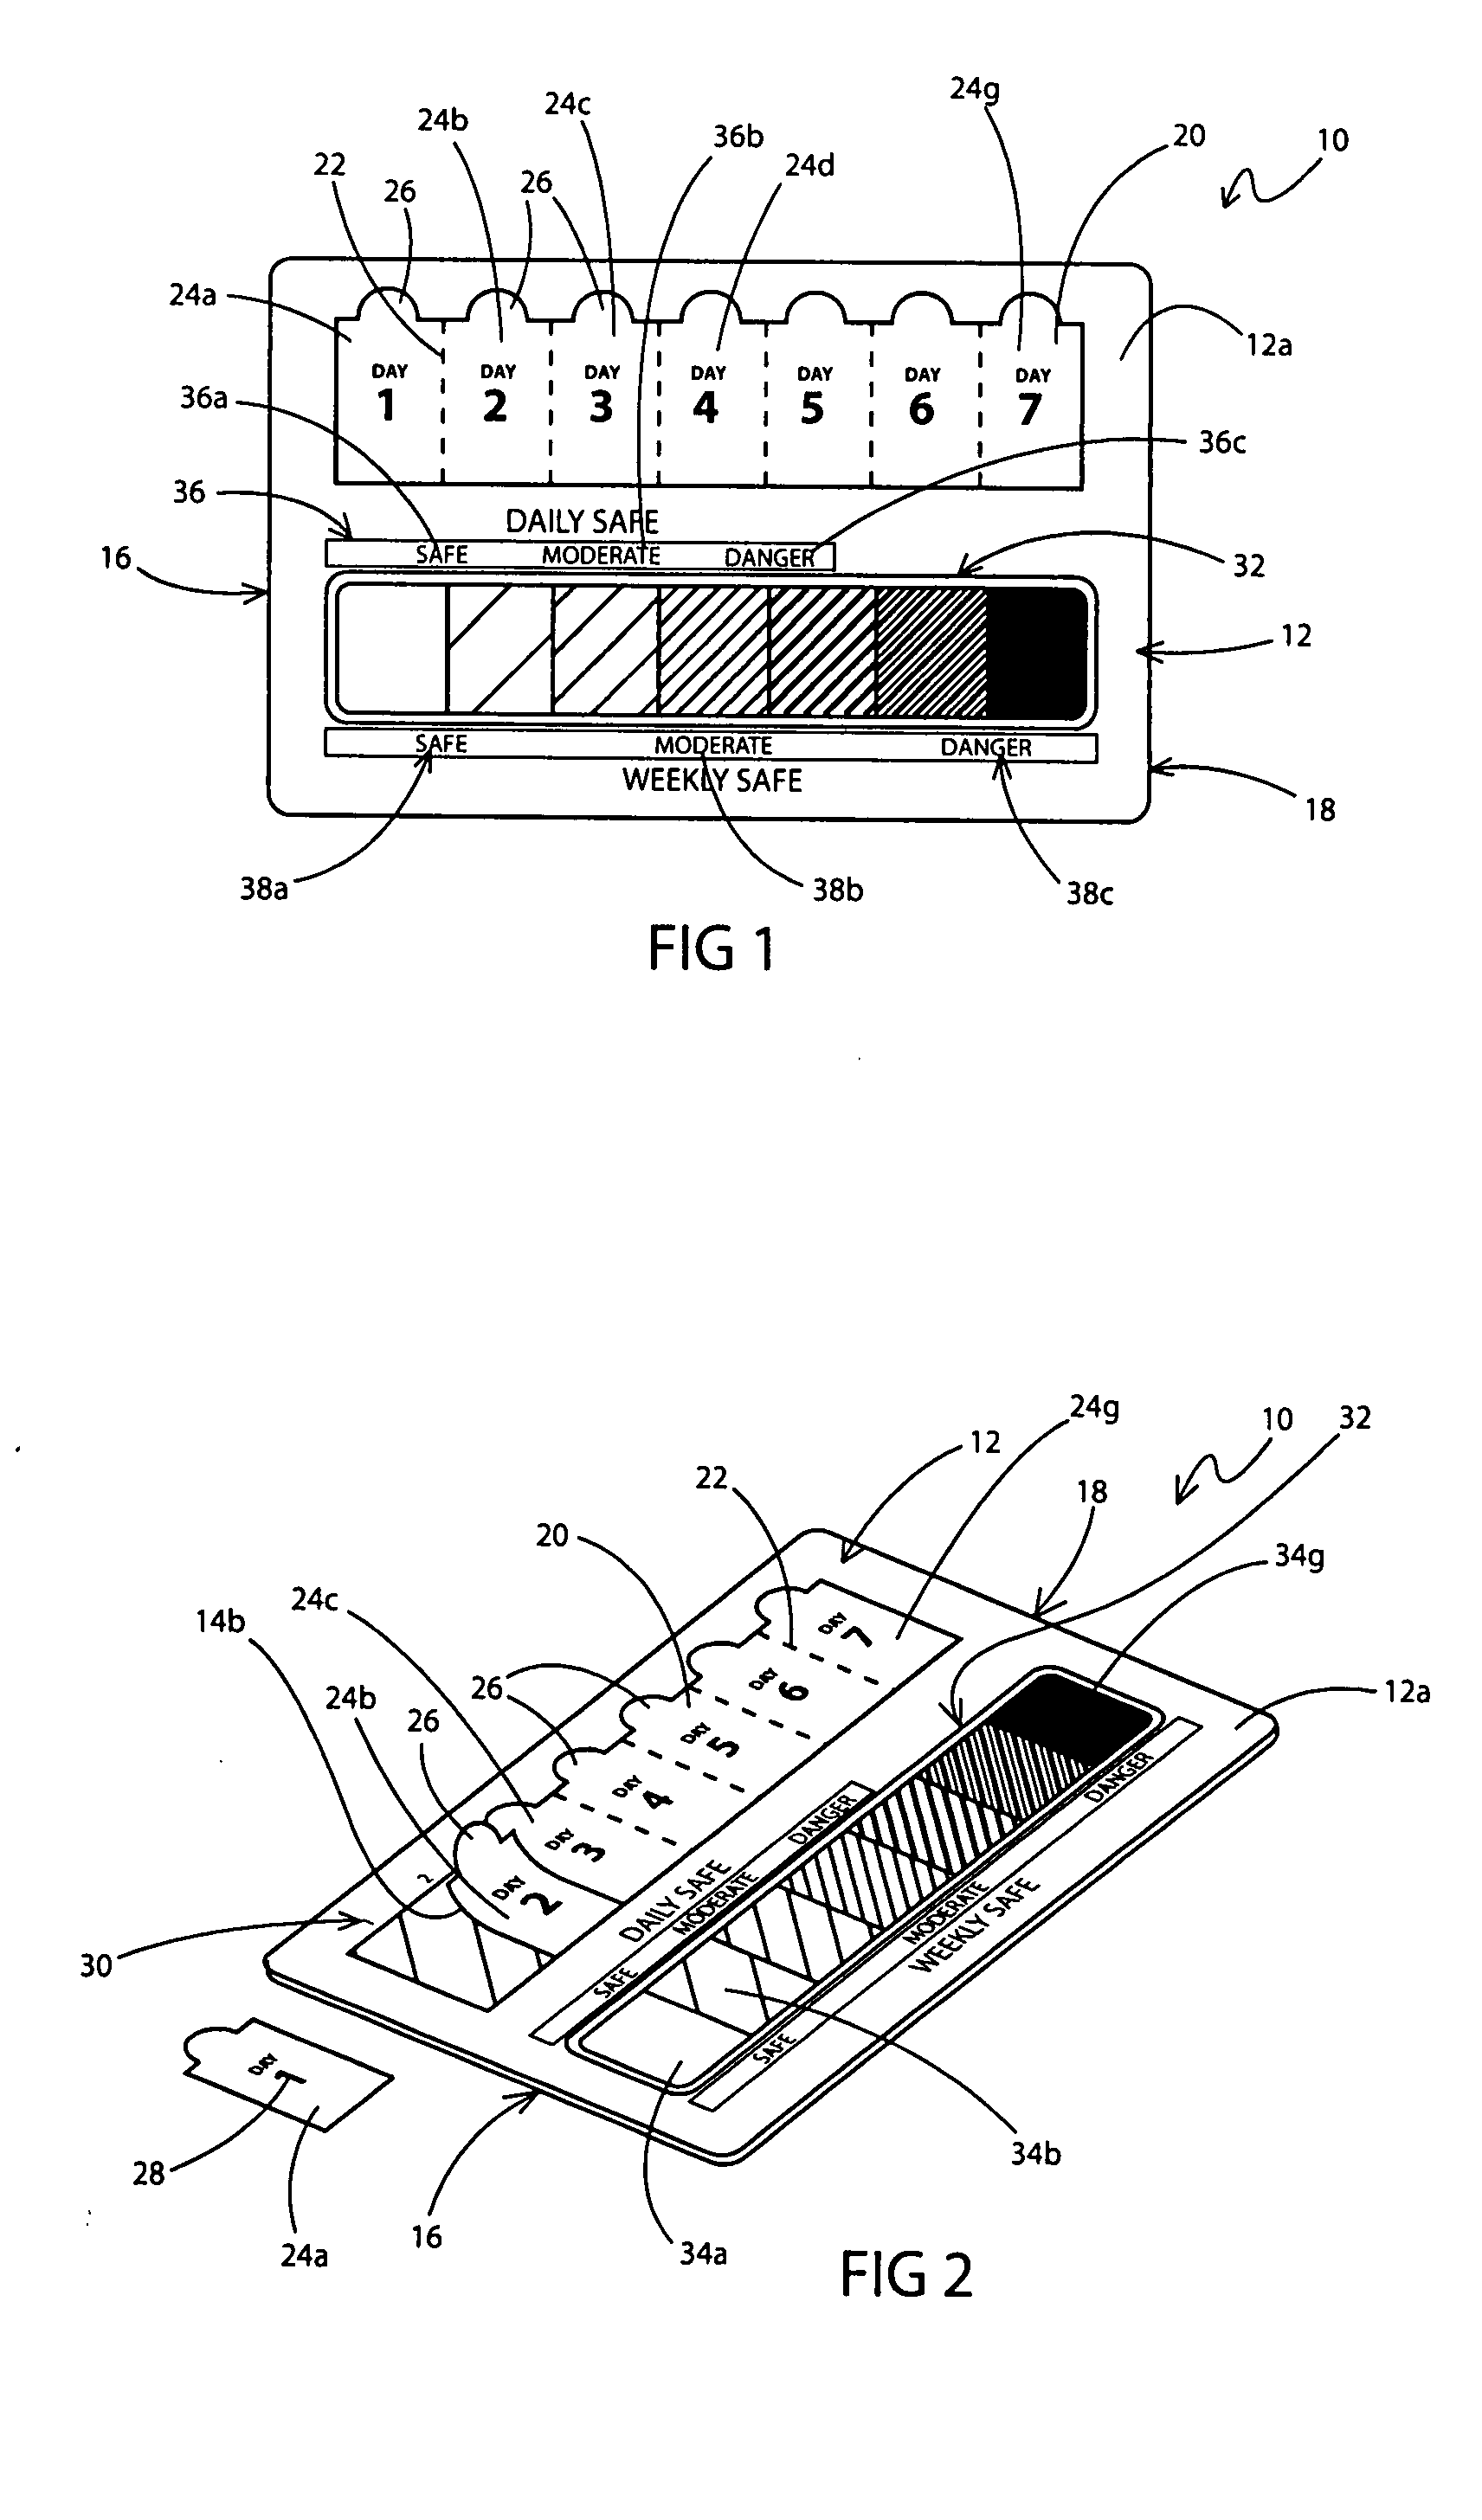 Ultraviolet radiation monitoring device and a method of using the same